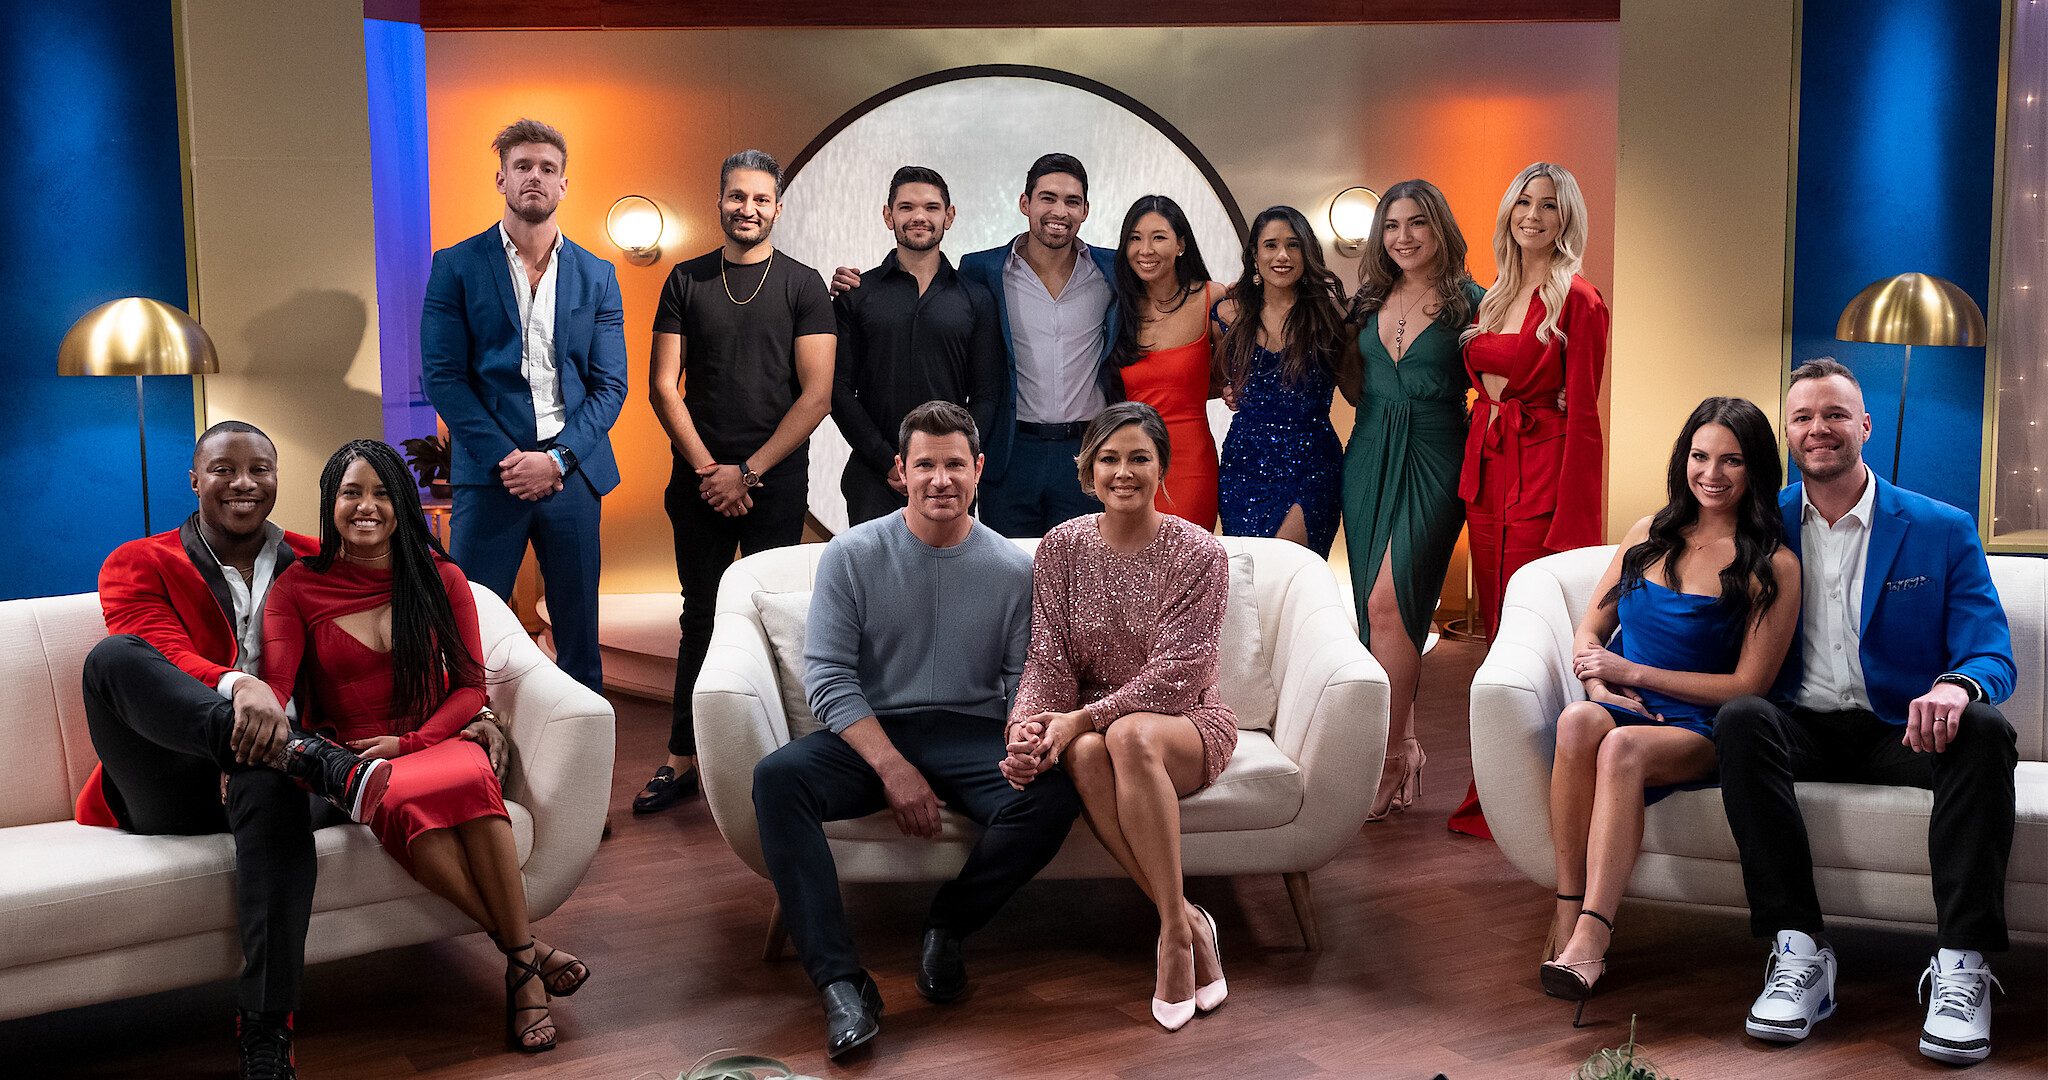 What Happened at the Love Is Blind Season 2 Reunion? pic